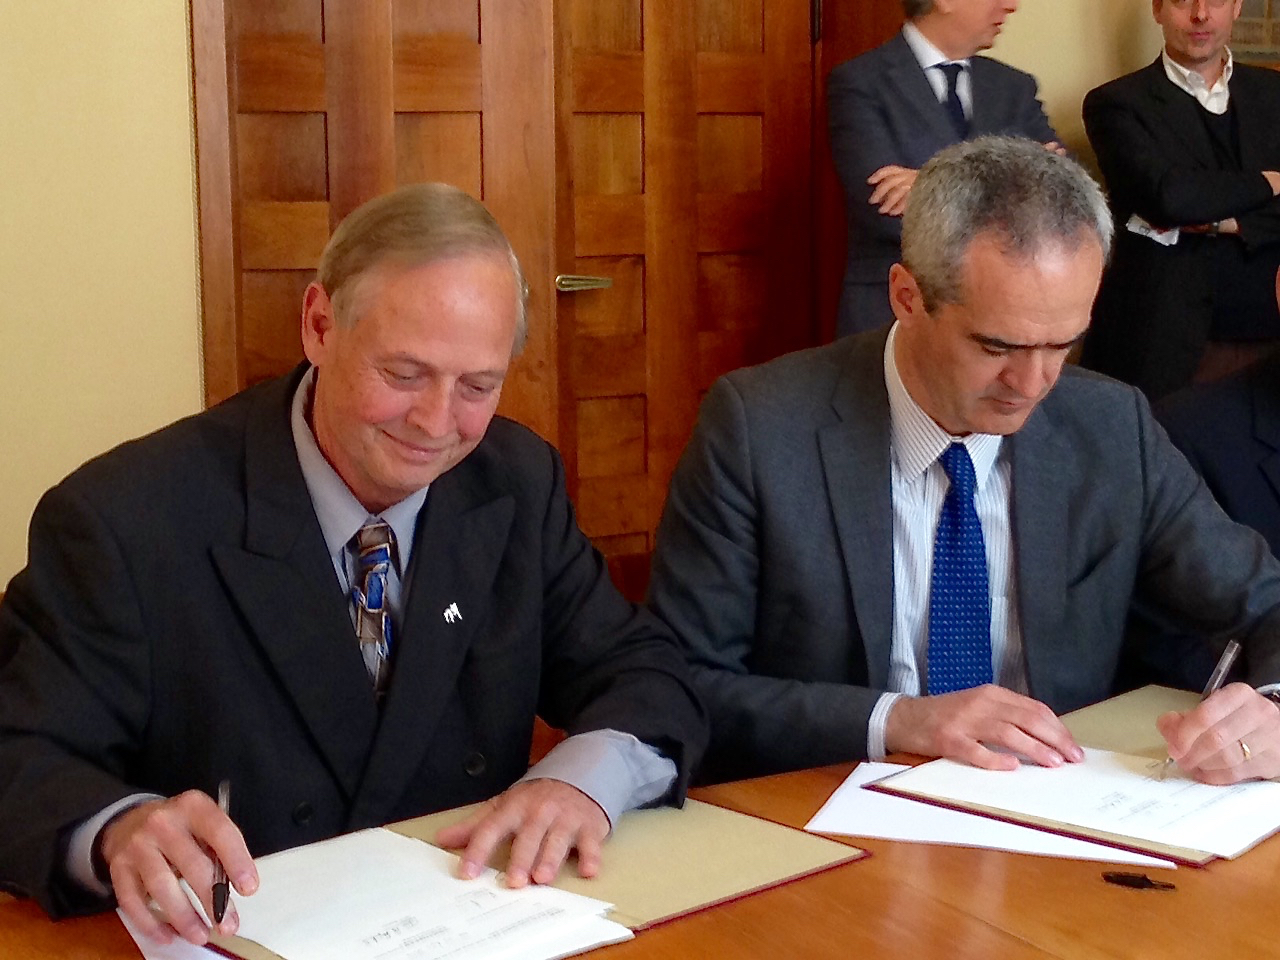 Don Shilling, left, head of the University of Georgia department of crop and soil sciences, and Rosario Rizzuto, rector of the University of Padova, sign an agreement finalizing a duel master's degree program between the universities.